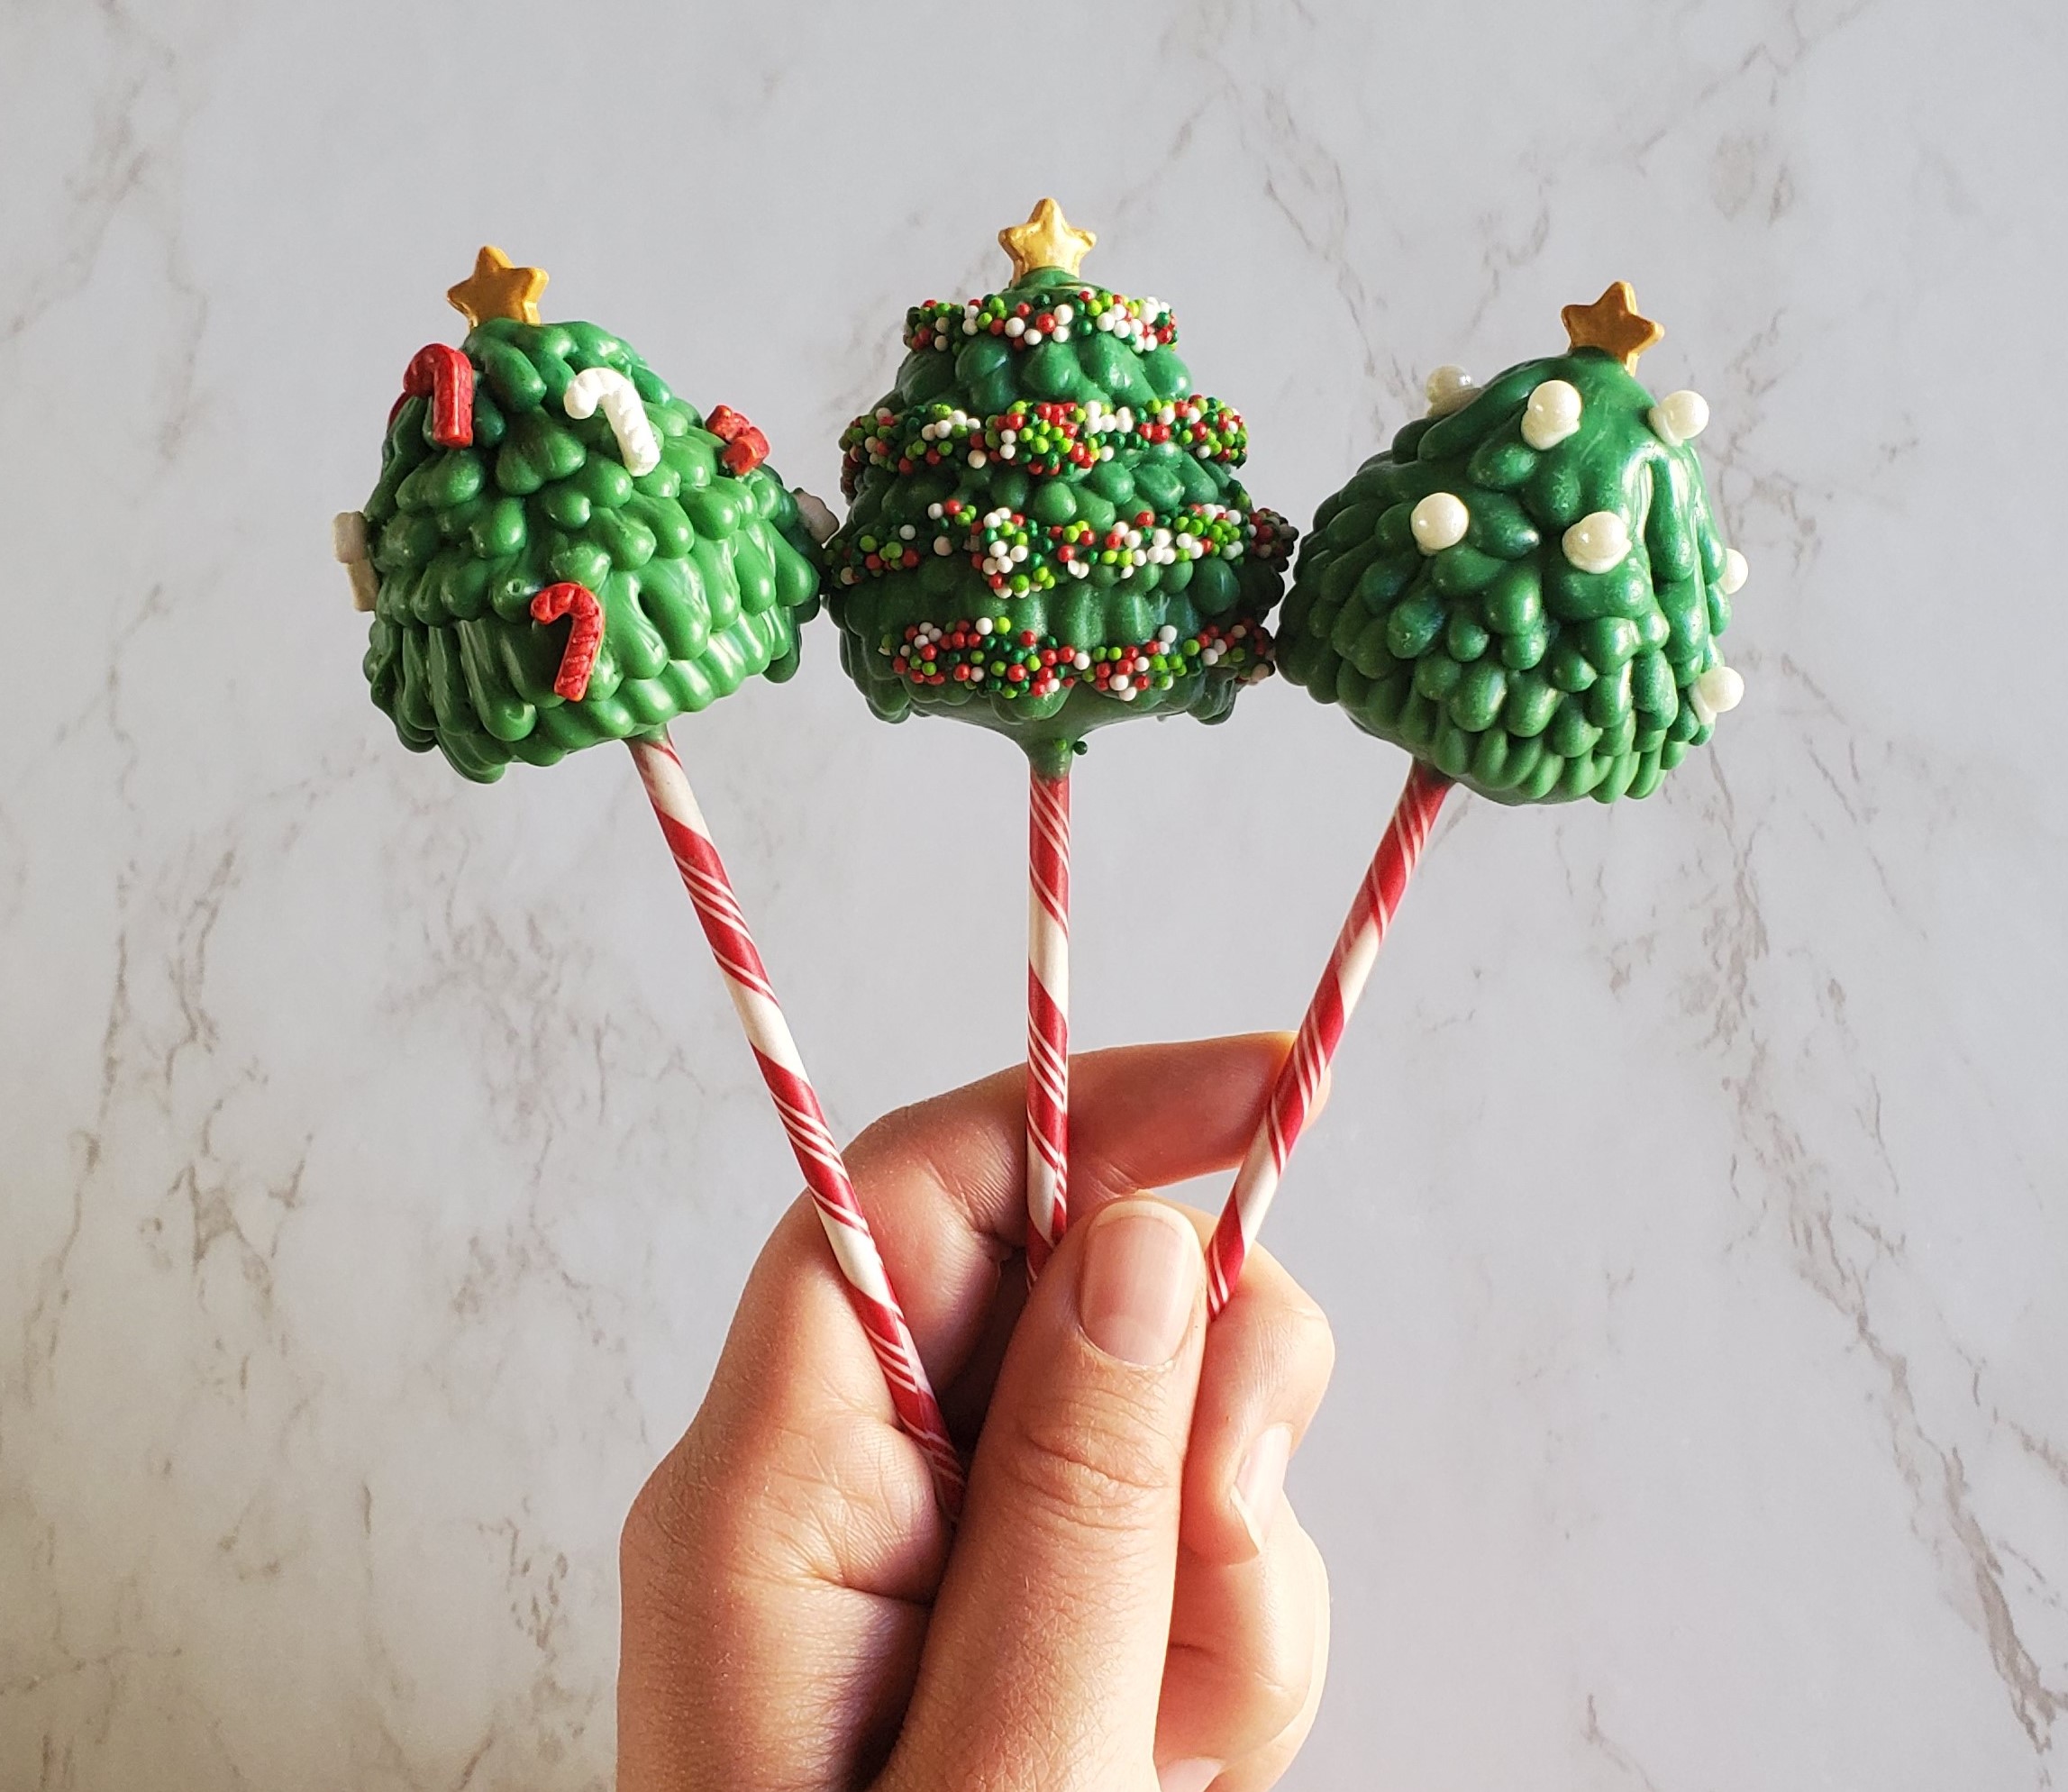 Three cake pops, shaped and decorated to look like Christmas trees. From left to right one has candy cake sprinkles, one has red, green and white non-perils, and one has white pearl sprinkles.